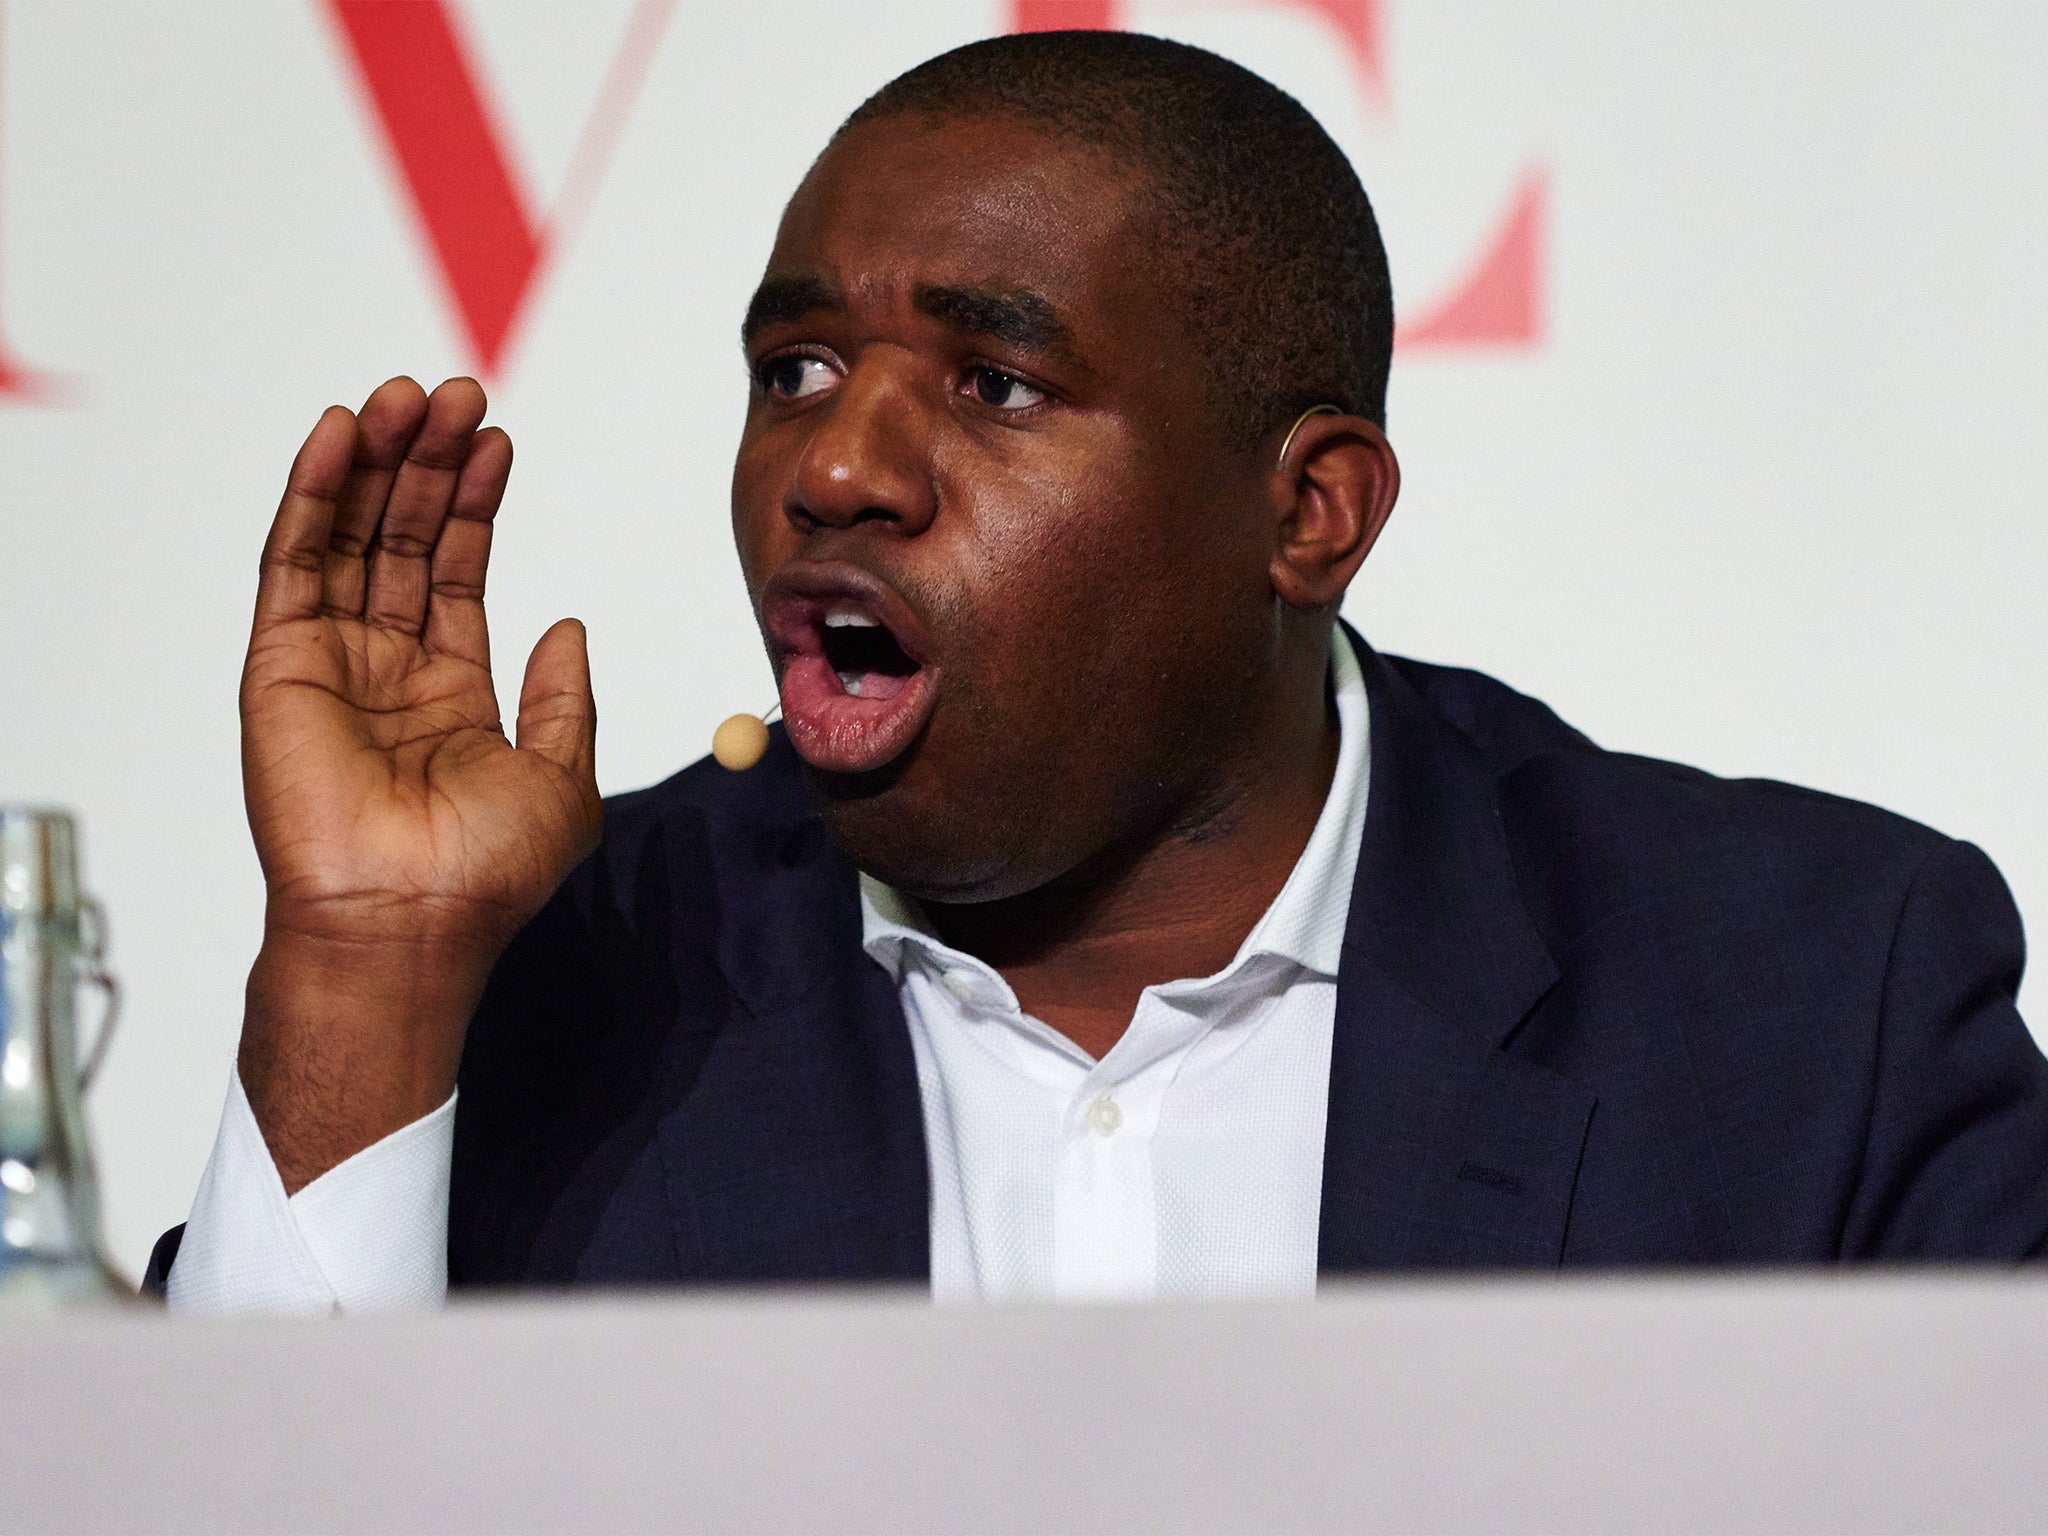 David Lammy accused Boris Johnson of using the 'nasty politics' of the 1930s to further his ambitions